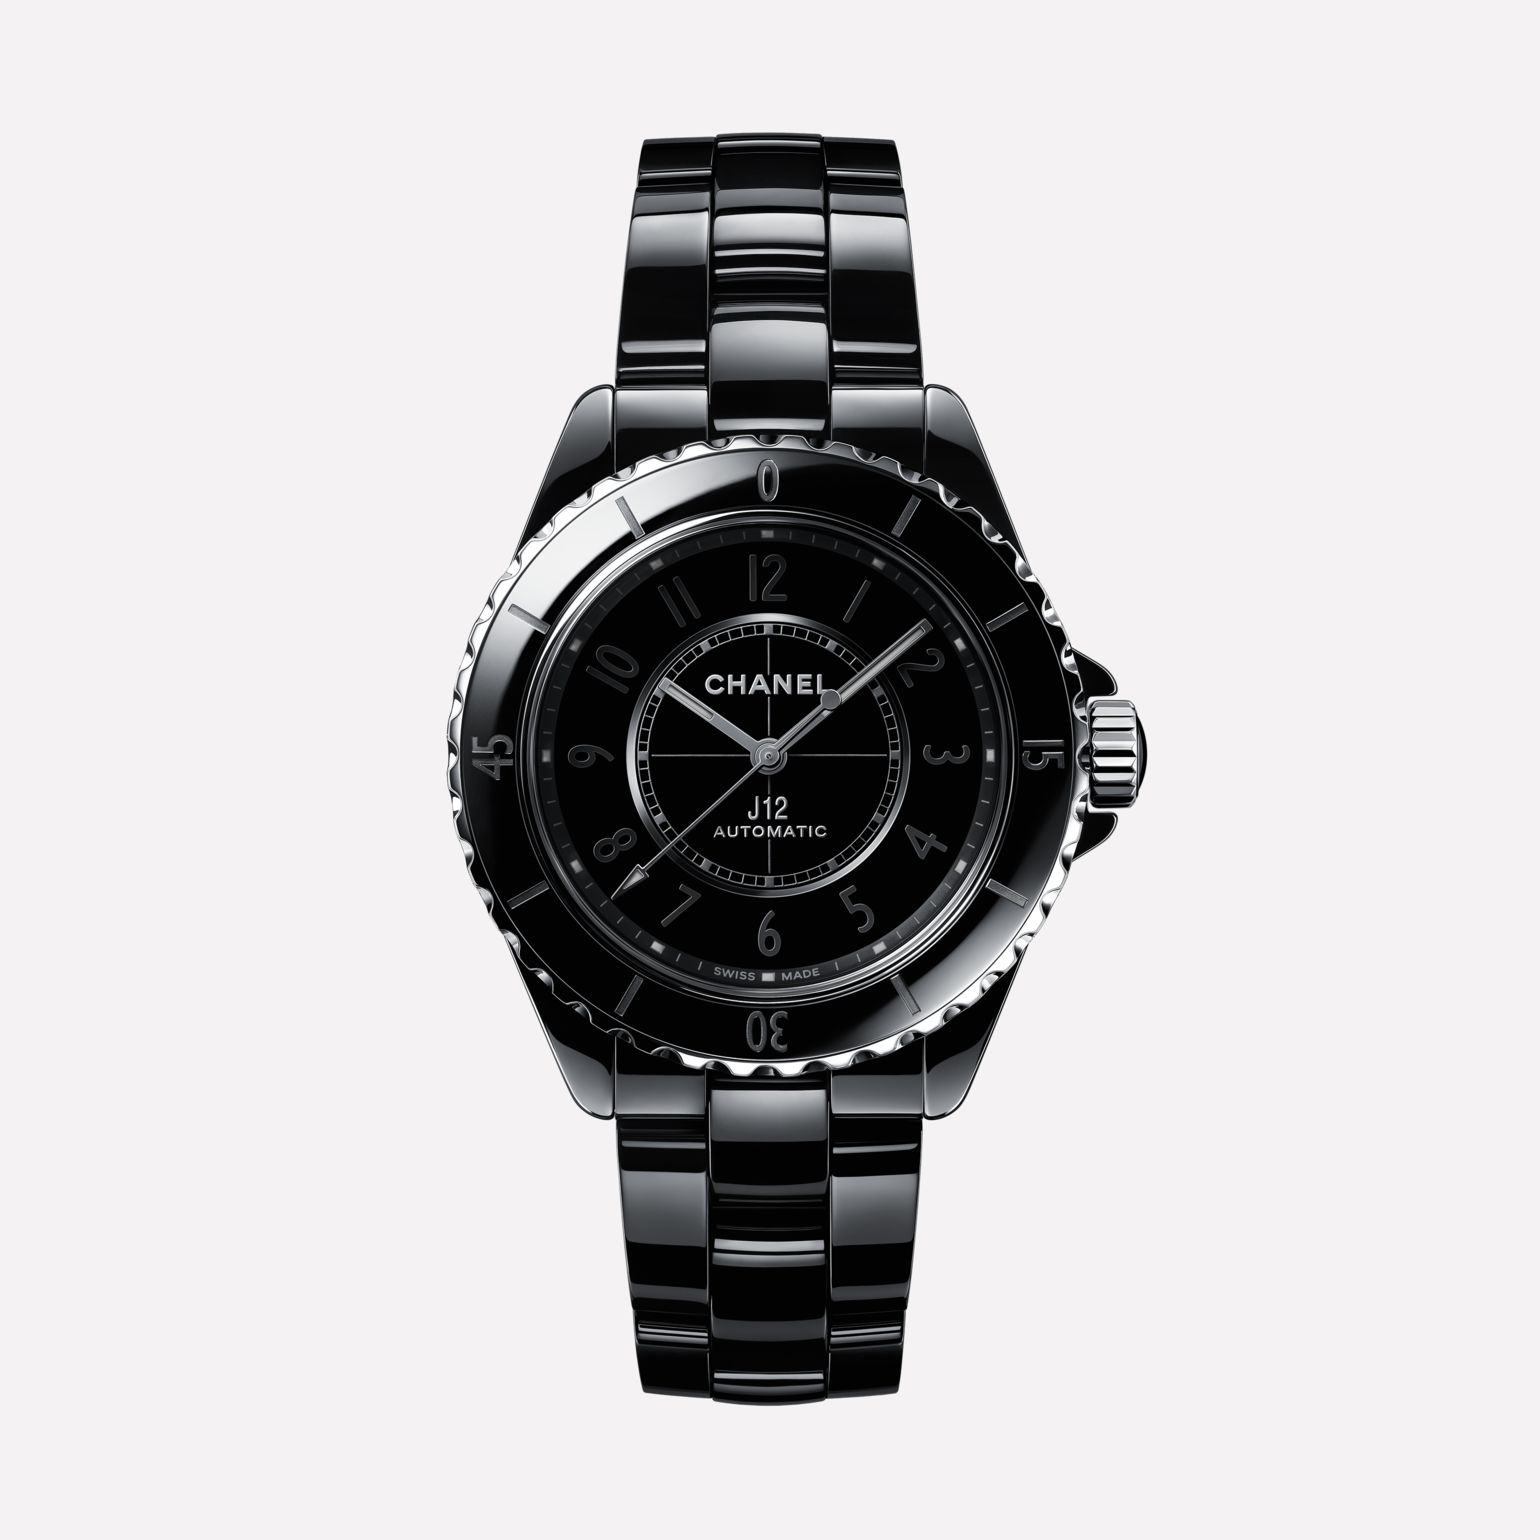 The New Chanel J12 with 'Manufacture' Movement – All You Need to Know